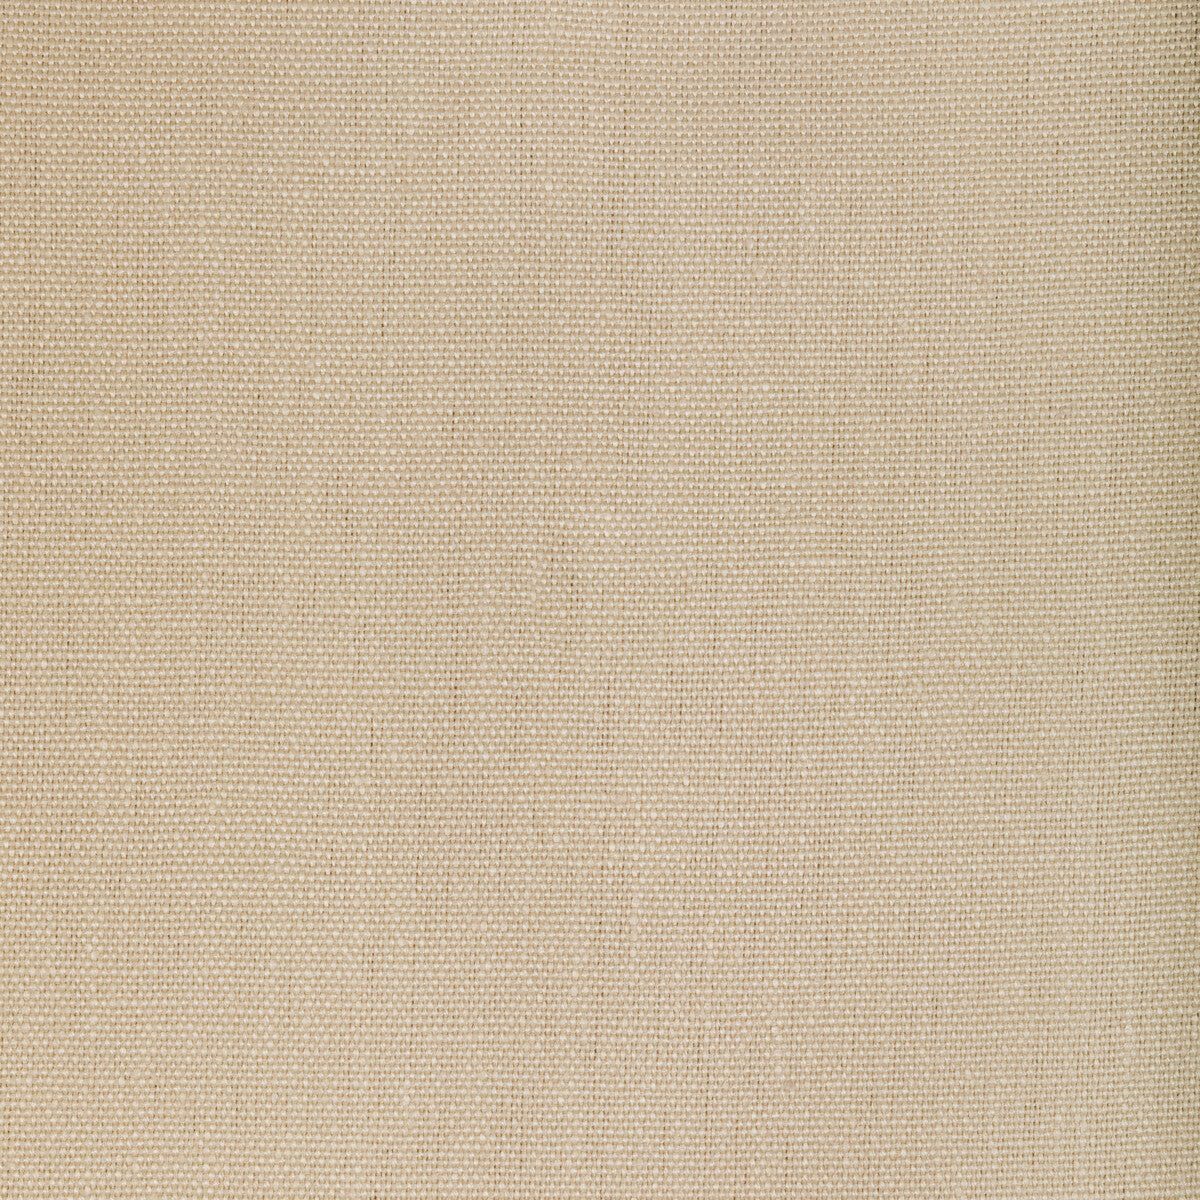 Kravet Basics fabric in 32260-116 color - pattern 32260.116.0 - by Kravet Basics in the Perfect Plains collection